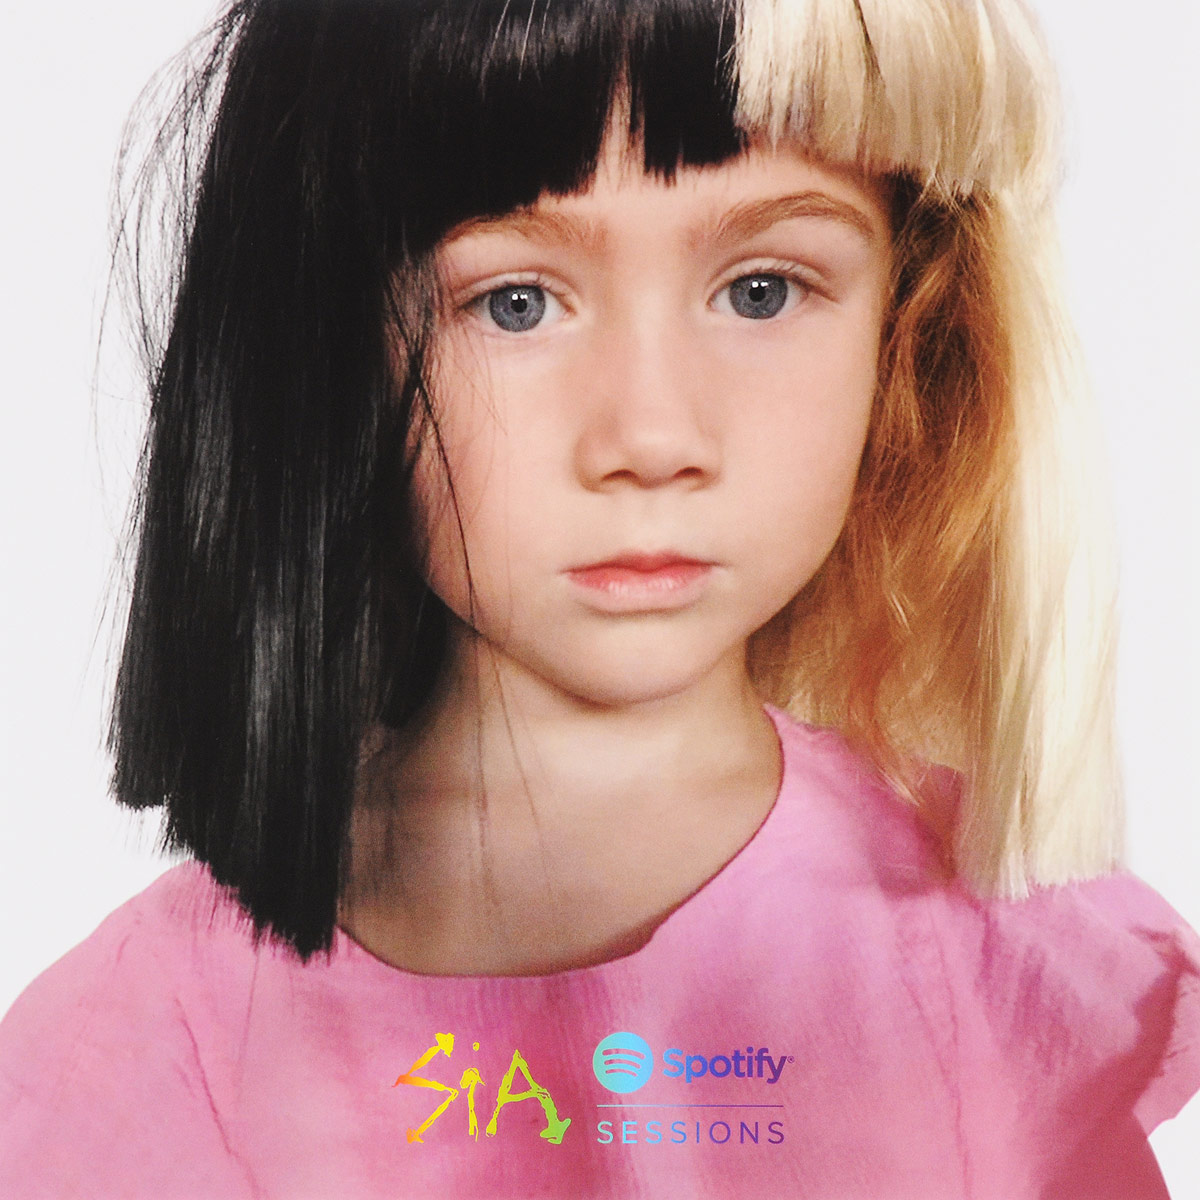 Sia. Spotify Sessions (LP)